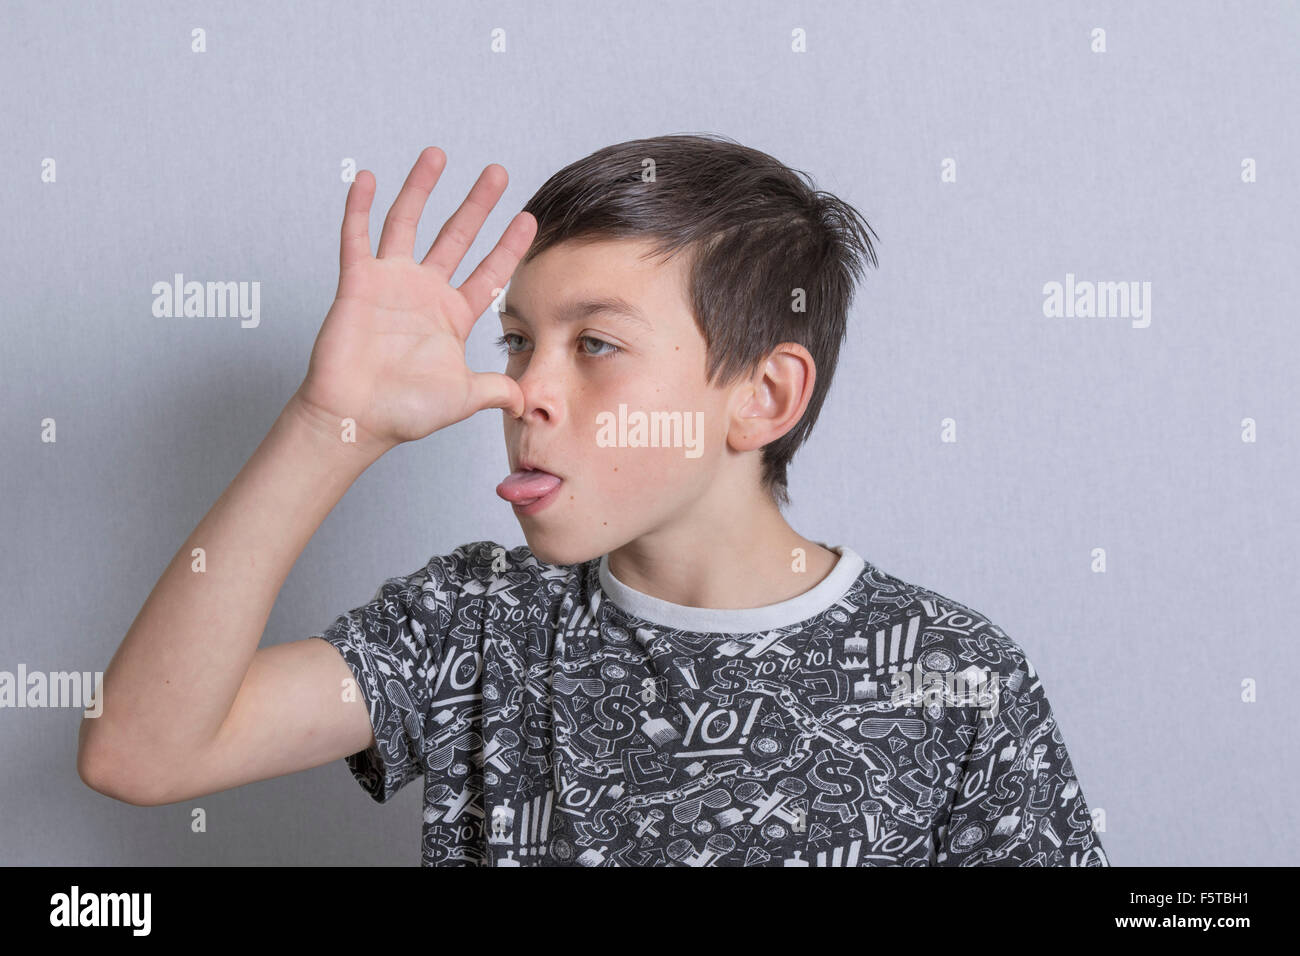 Pre-teen boy sticking his tongue out Stock Photo